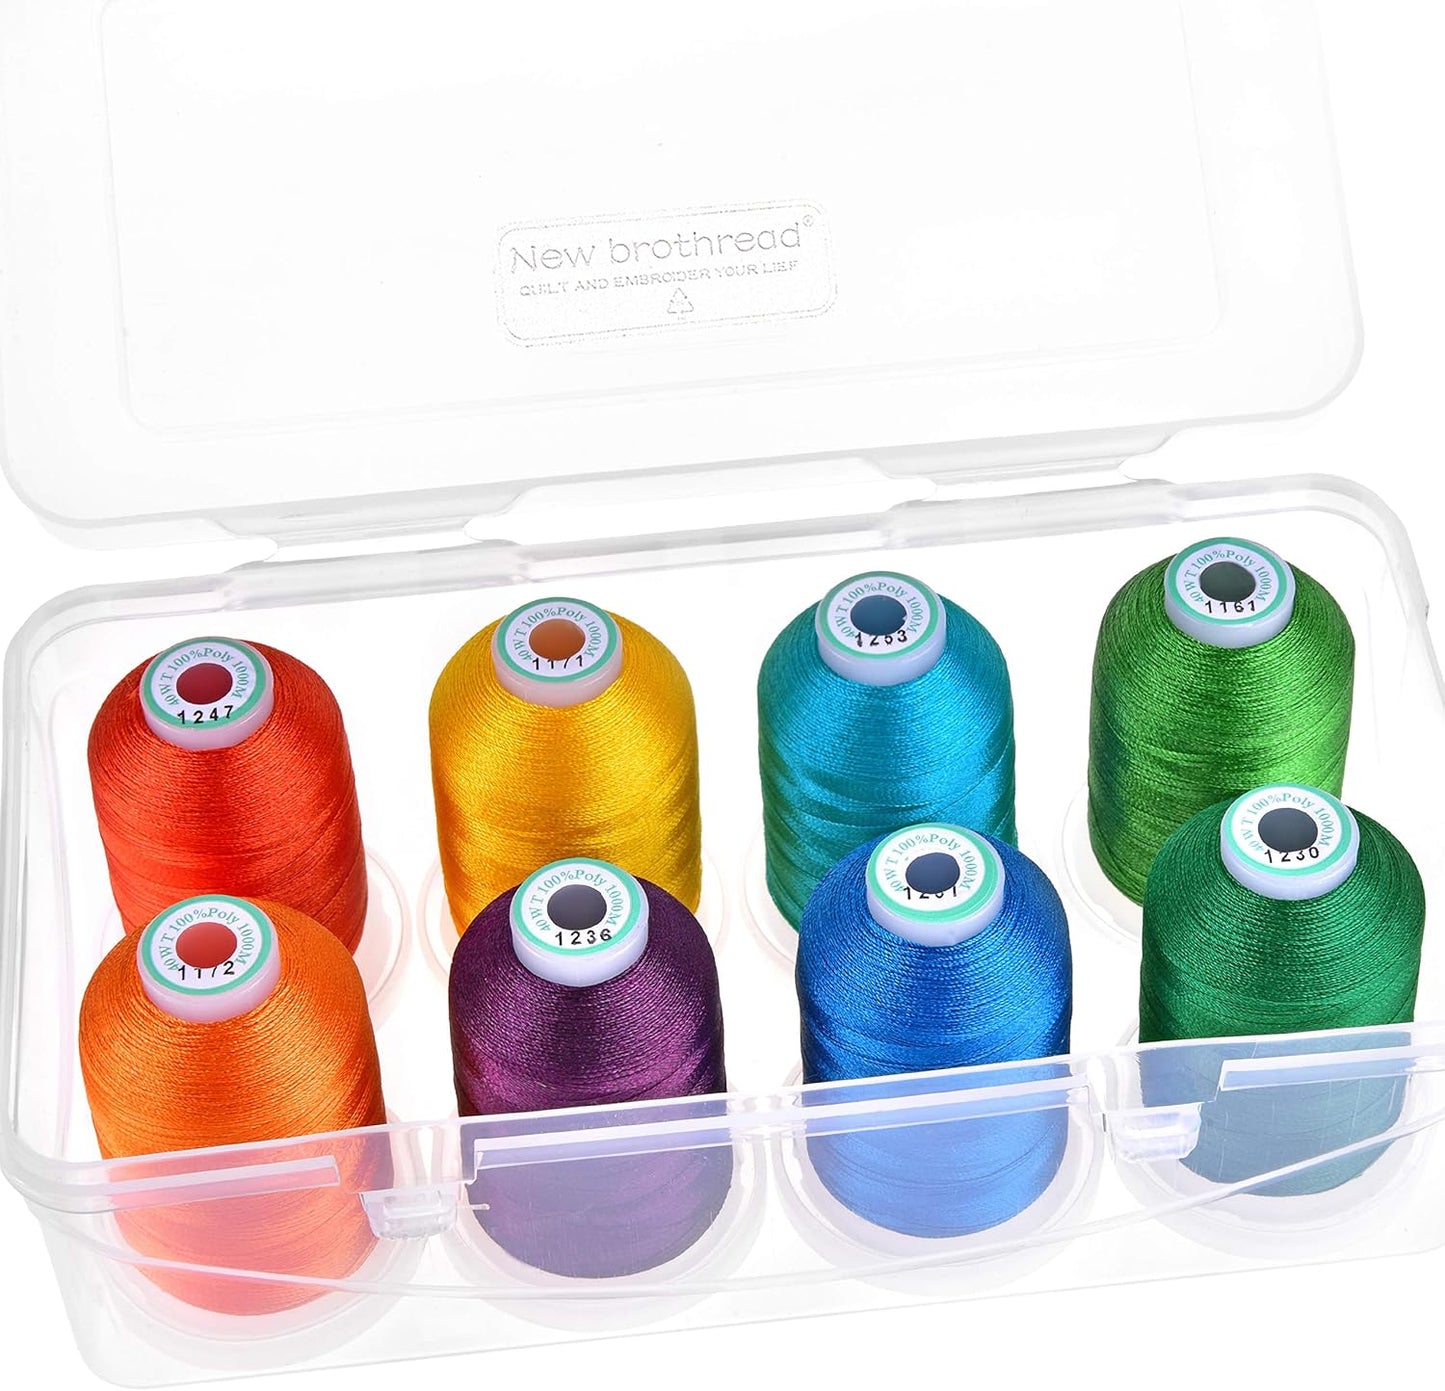 - 20 Options - 8 Snap Spools of 1000M Each Polyester Embroidery Machine Thread with Clear Plastic Storage Box for Embroidery & Quilting - Variegated Color1